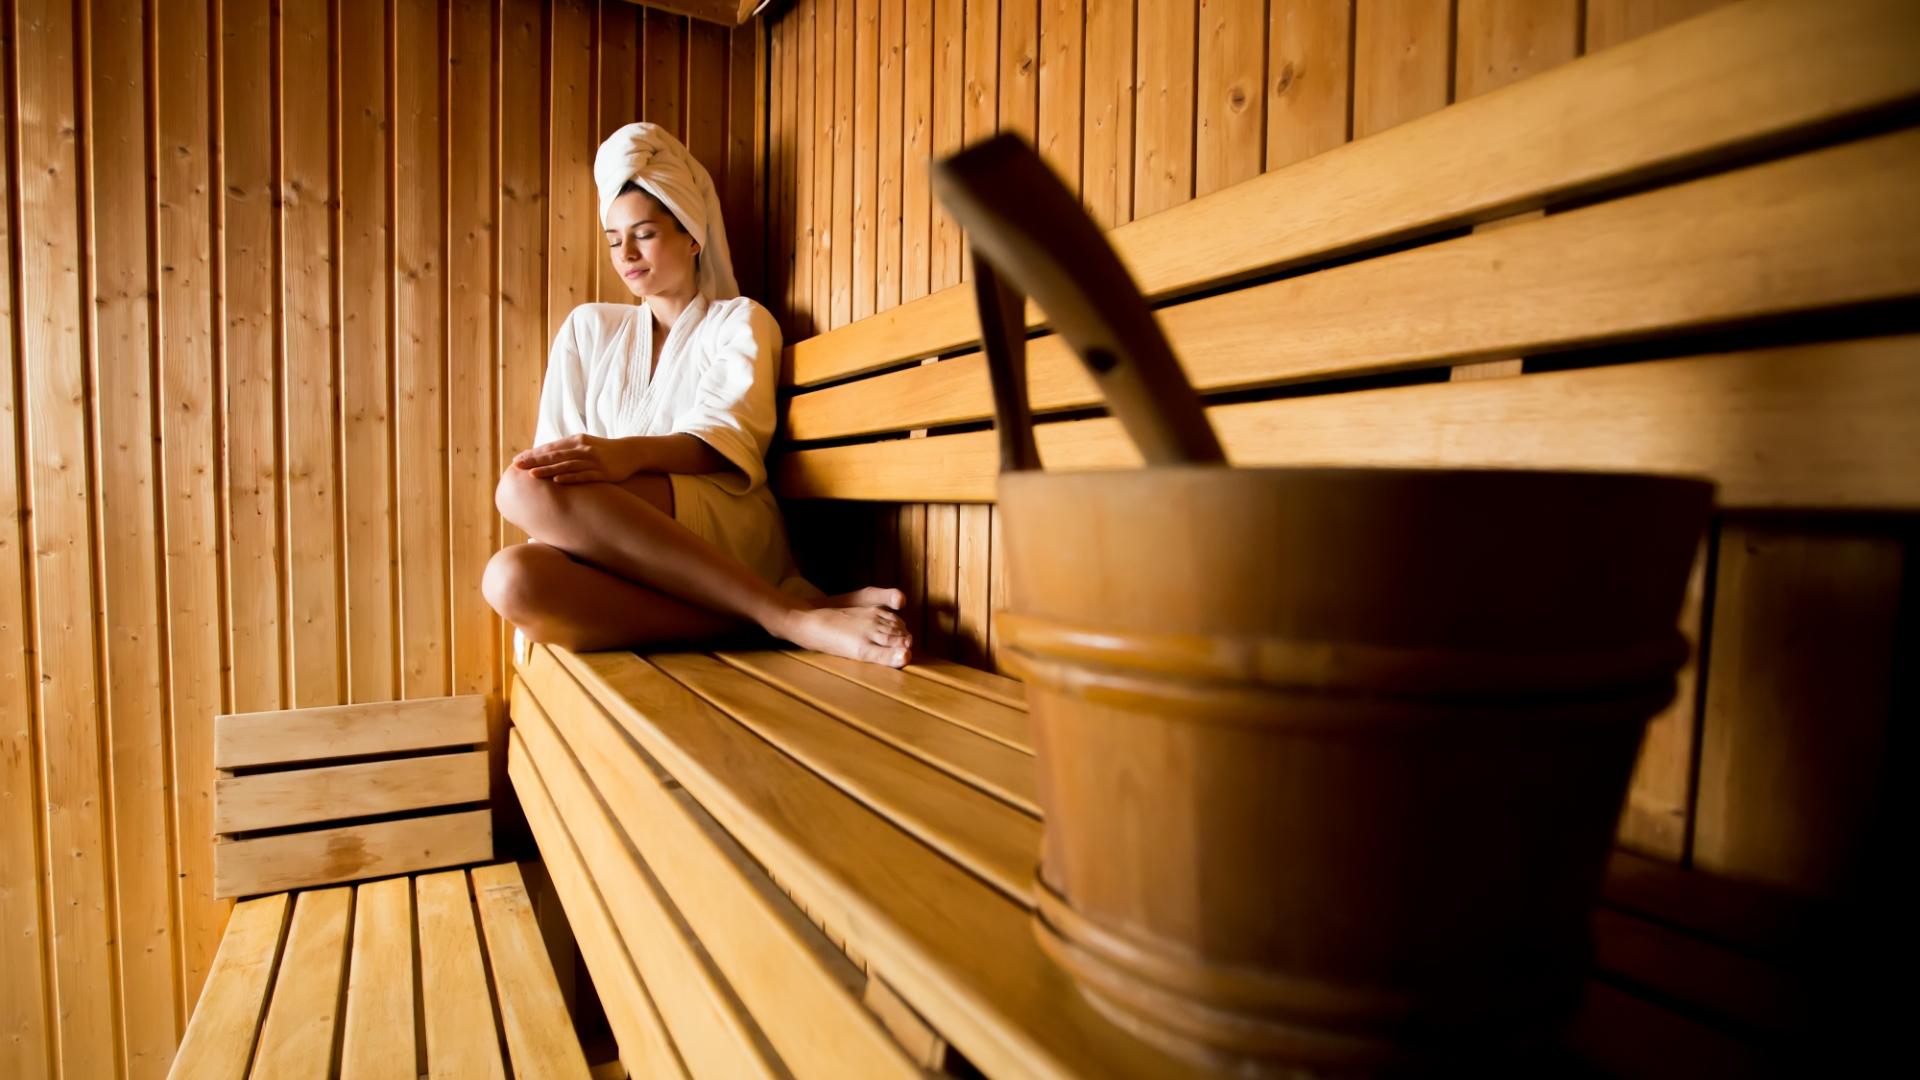 Relaxed woman in wooden sauna with bucket and ladle.